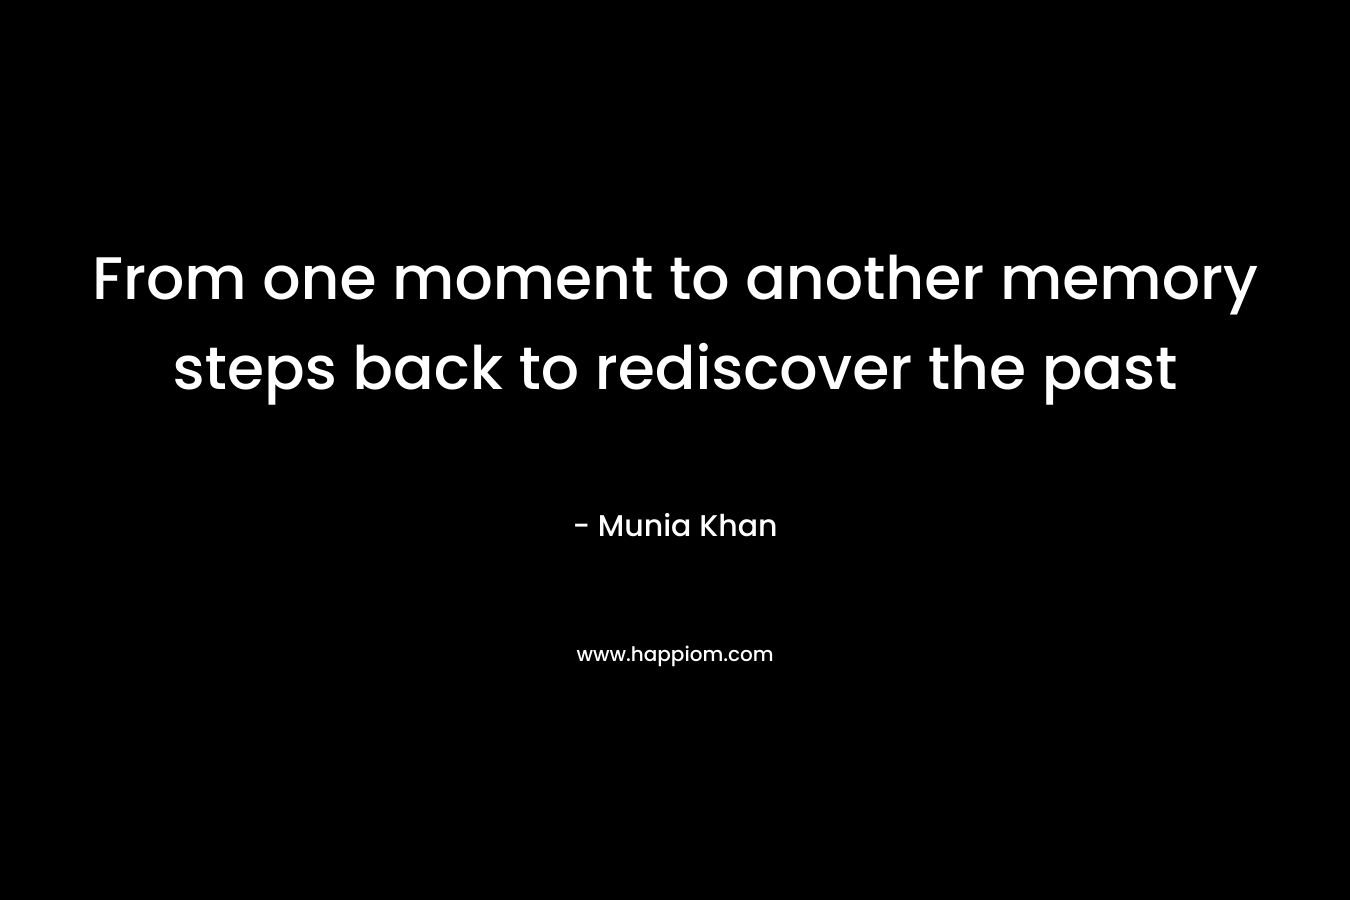 From one moment to another memory steps back to rediscover the past